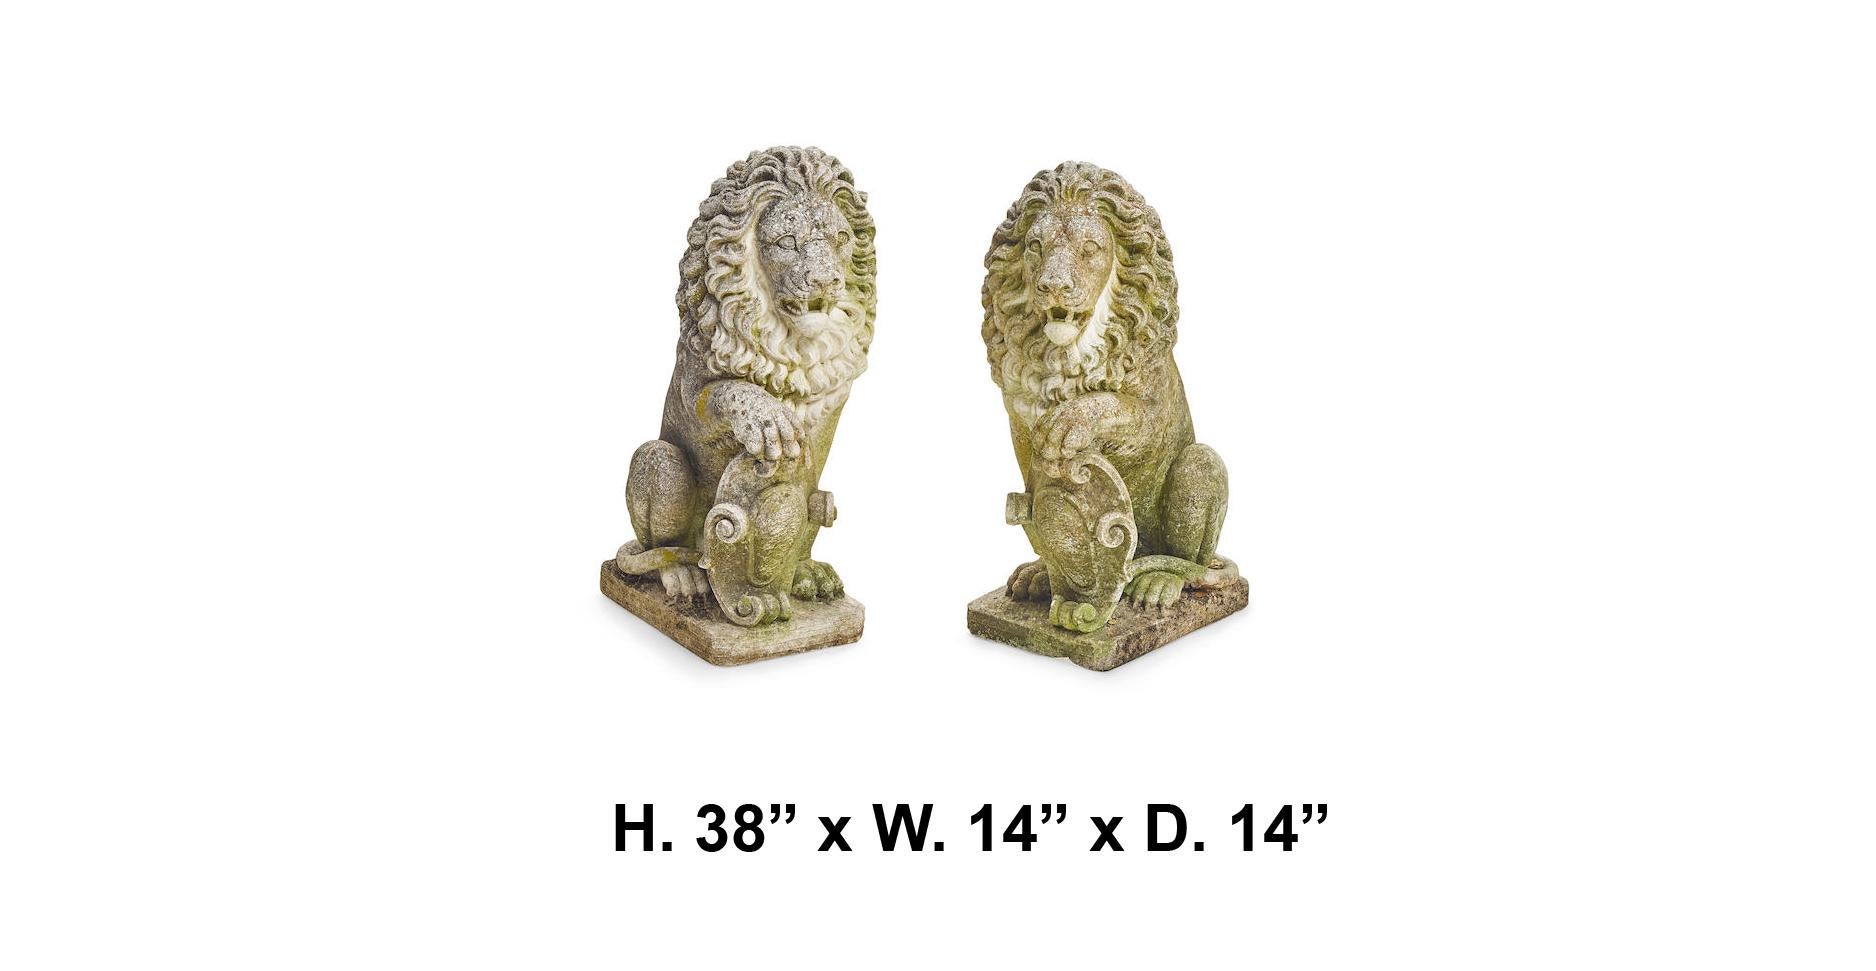 Outstanding and opposing pair of continental cast stone guardian lions with coat of arms, 
mid-20th century.

Each lion is seated on its hind legs with its palm wielding a coat of arms, meticulous attention to the details throughout. The